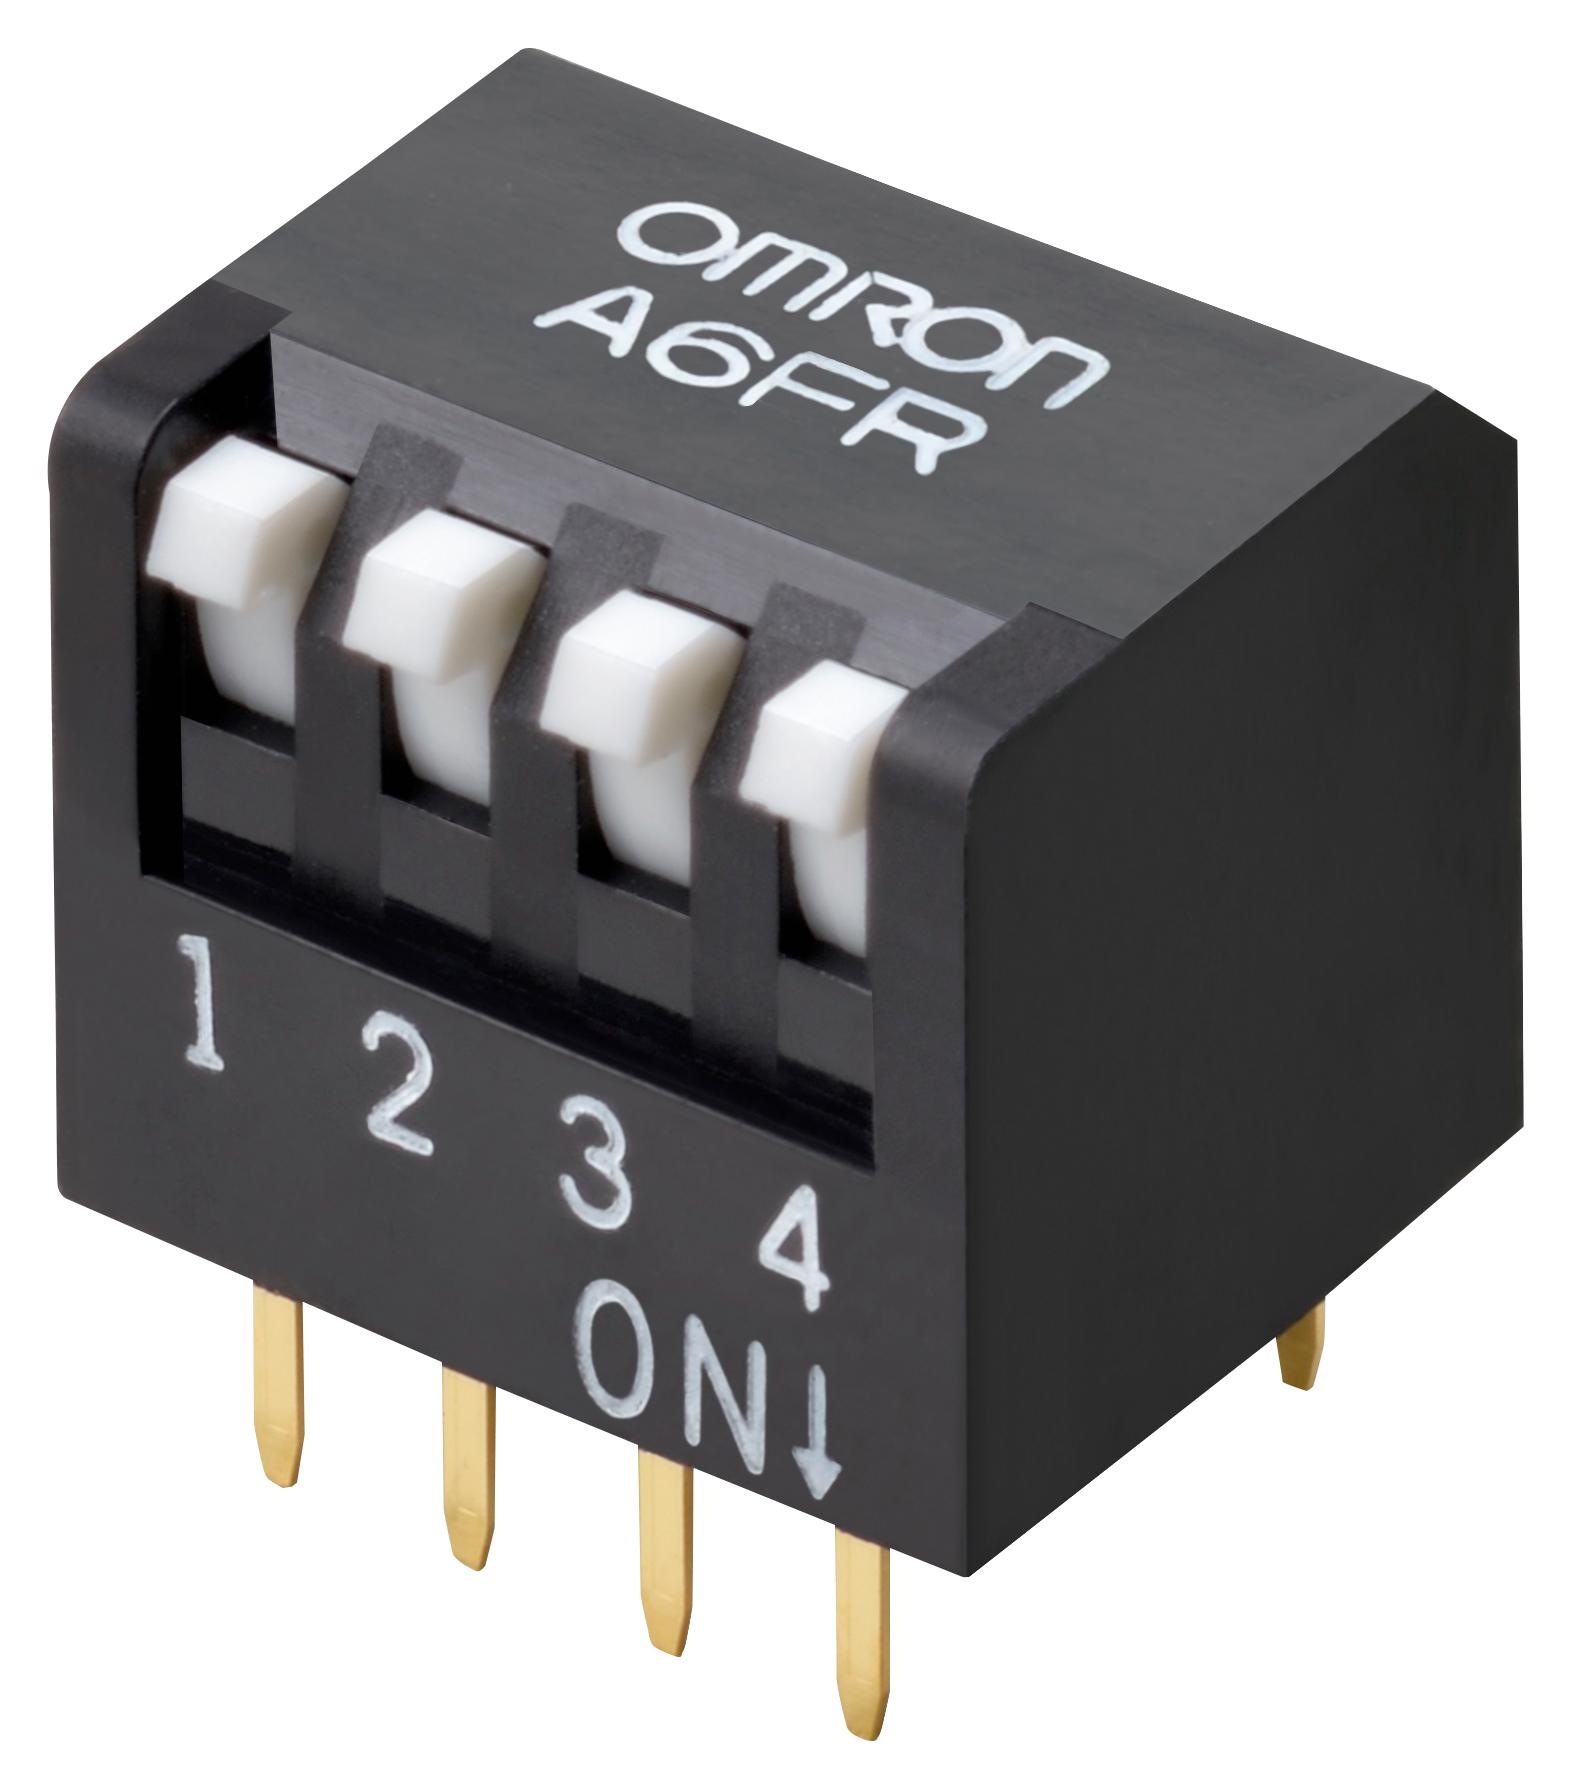 A6FR-5101 DIP SWITCH, 5POS, SPST, PIANO KEY, TH OMRON